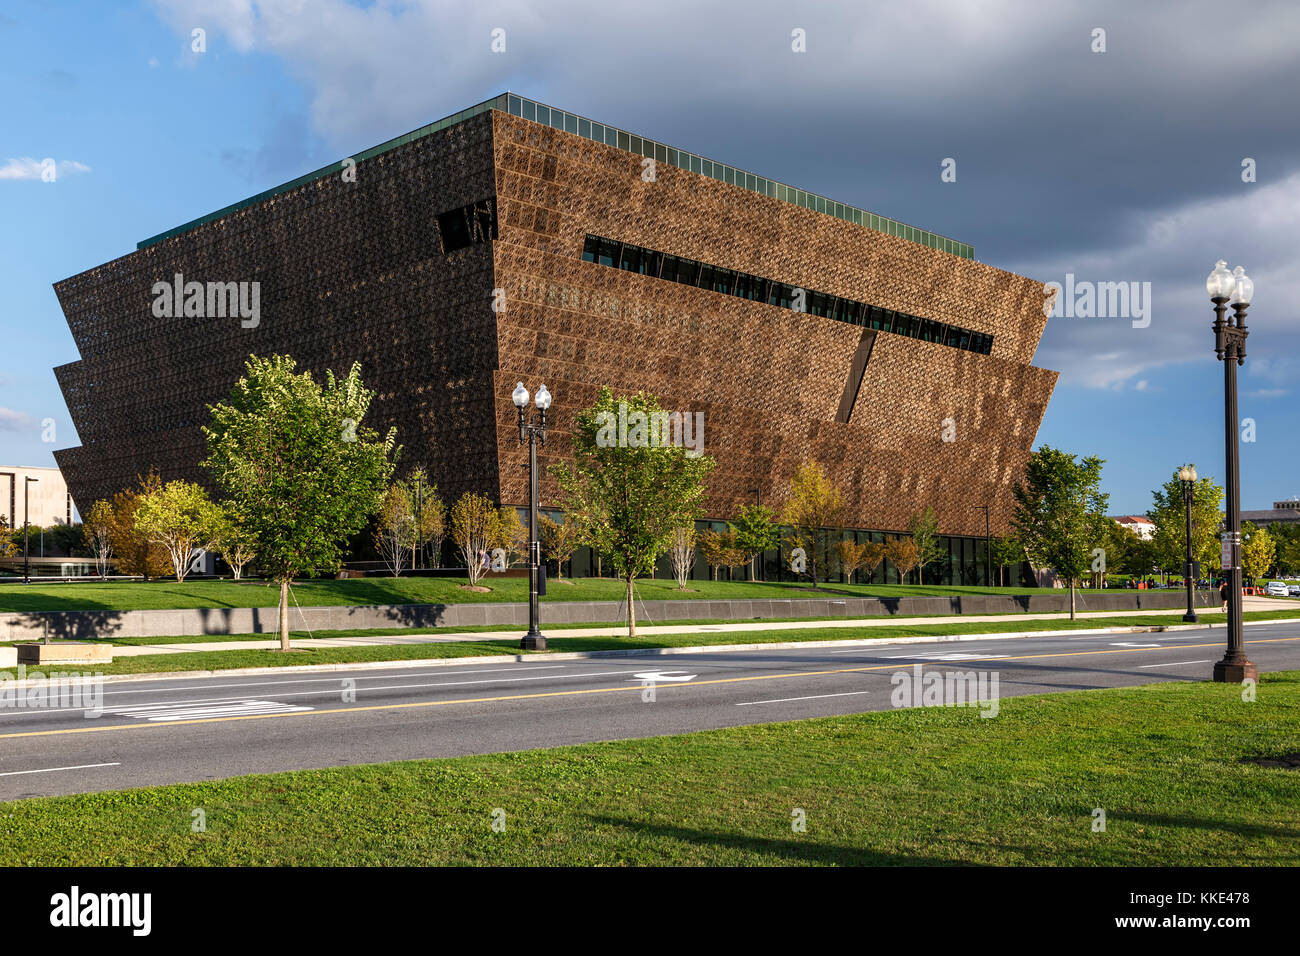 Smithsonian National Museum of African American History and Culture, Washington, District de Columbia USA Banque D'Images